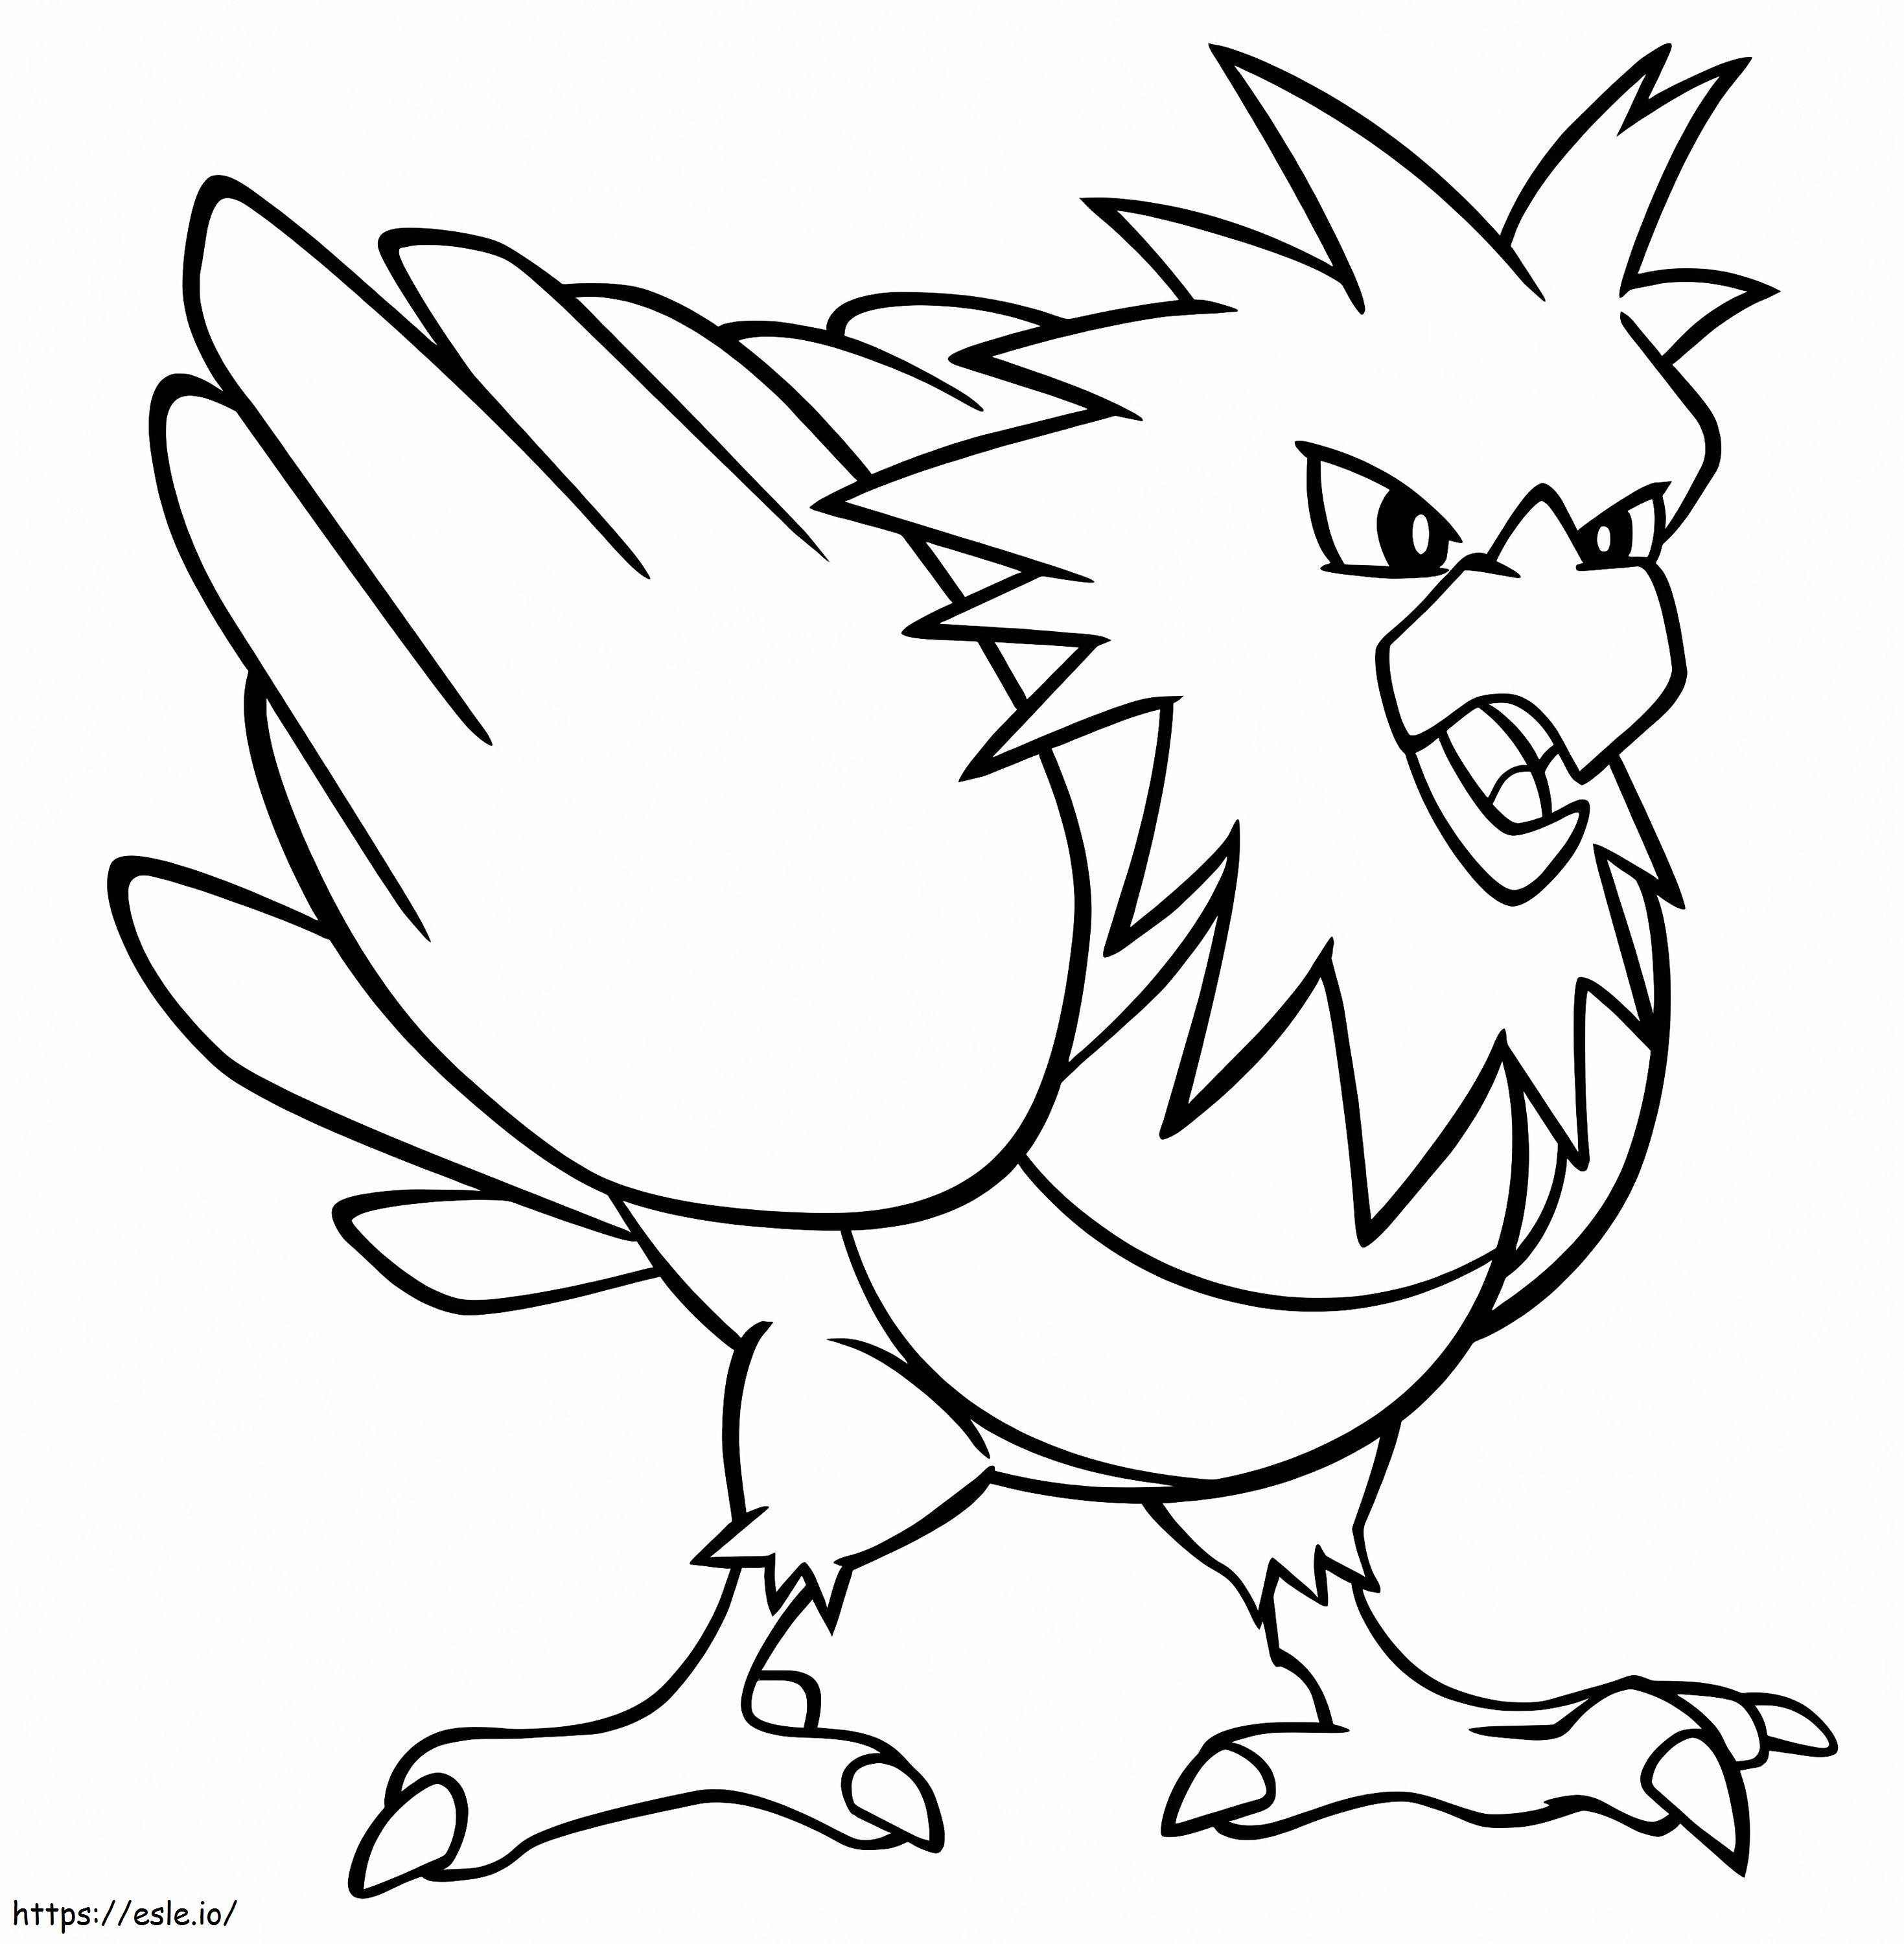 Pokemon Spearow coloring page